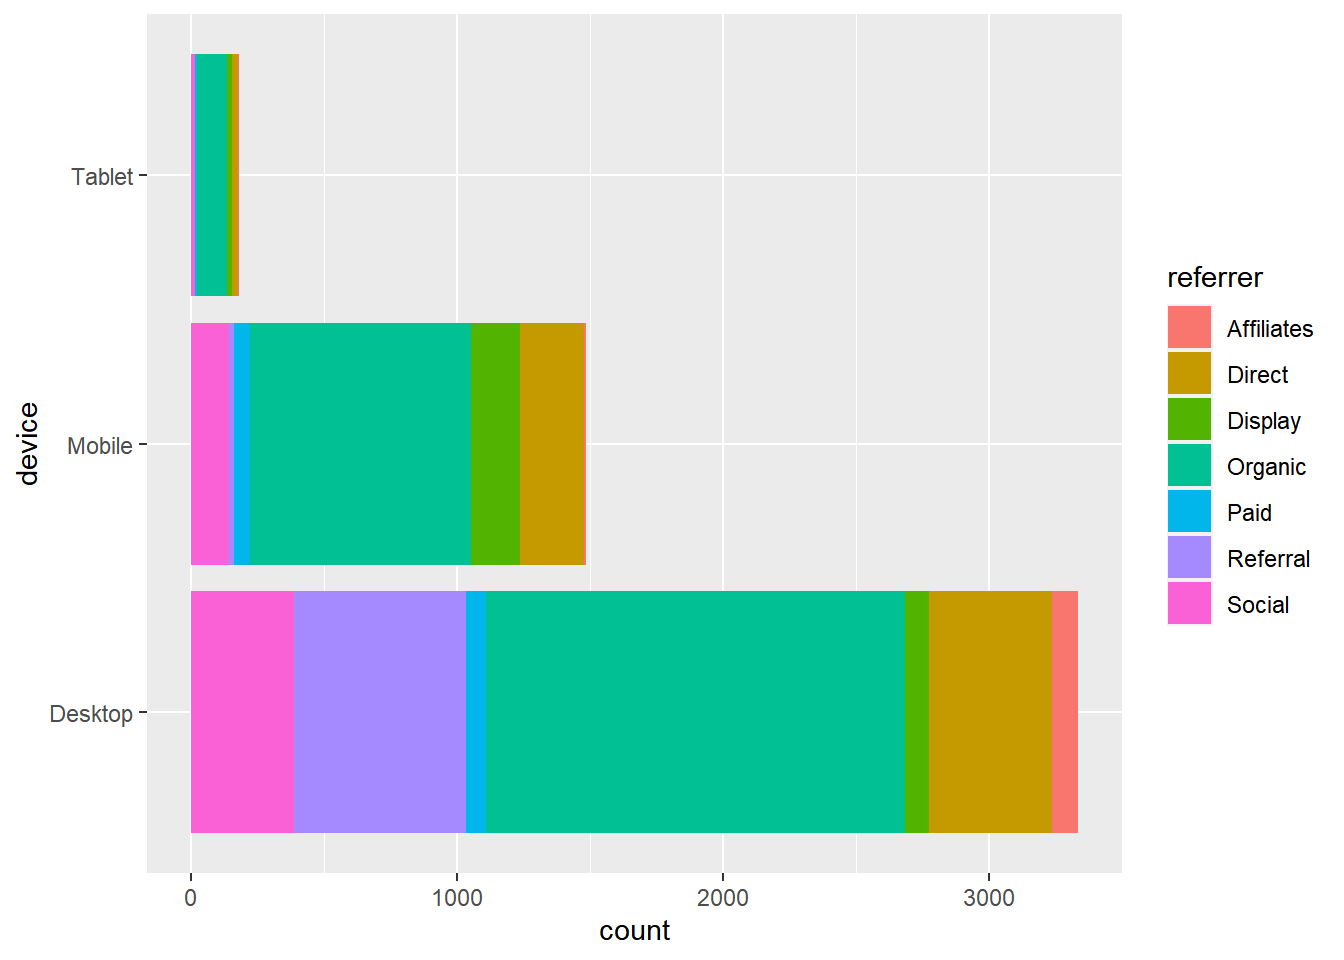 R How To Use Ggplot2 To Create A Stacked Bar Chart Of Three Variables